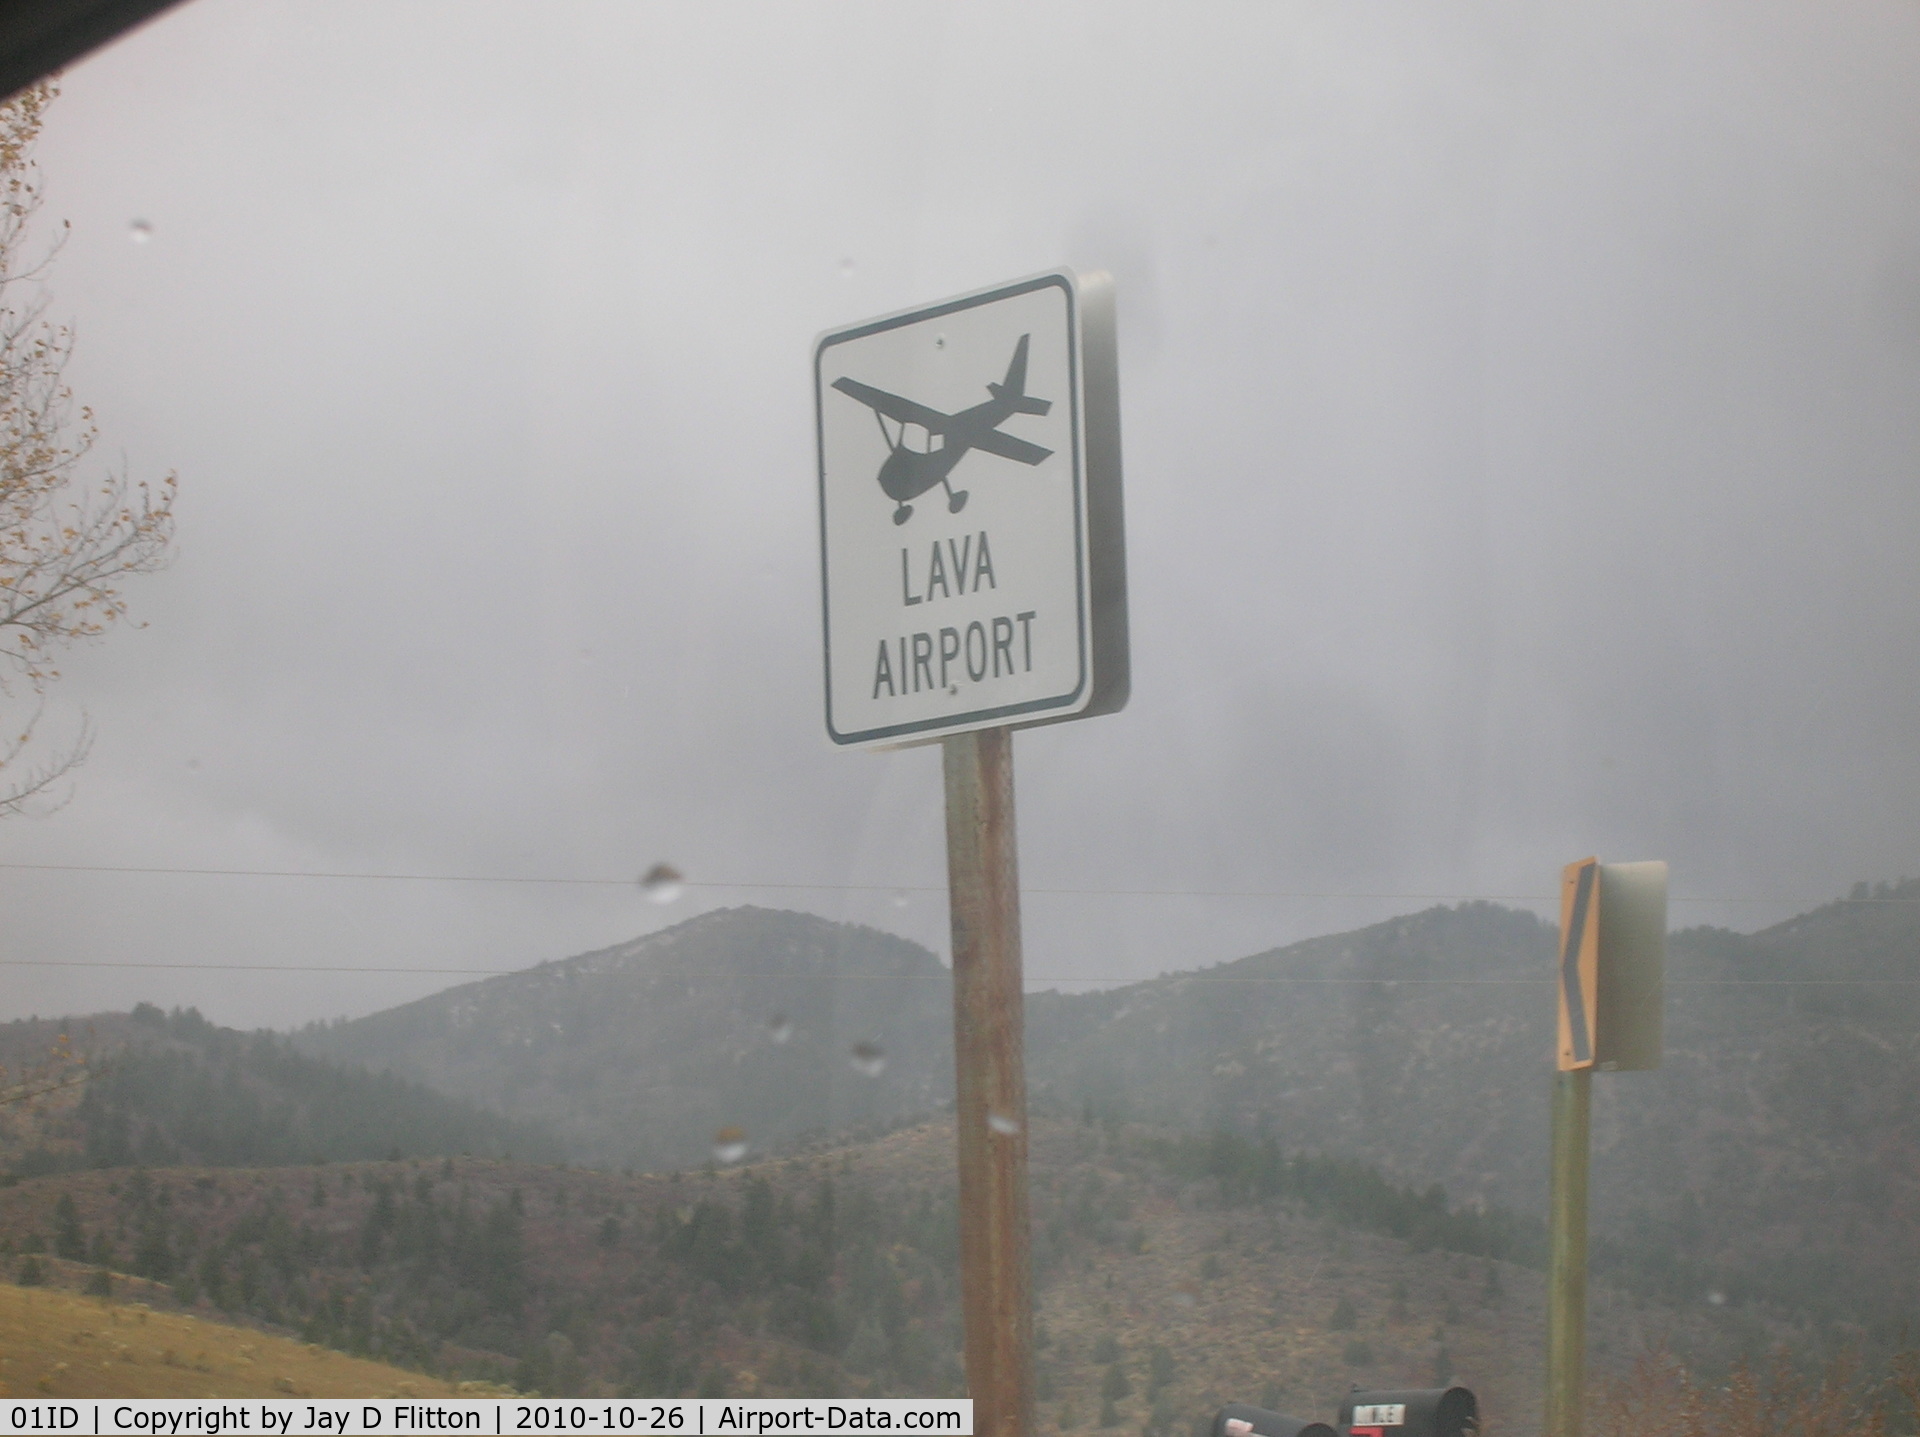 Lava Hot Springs Airport (01ID) - Lava Hot Springs, Idaho Airport Sign